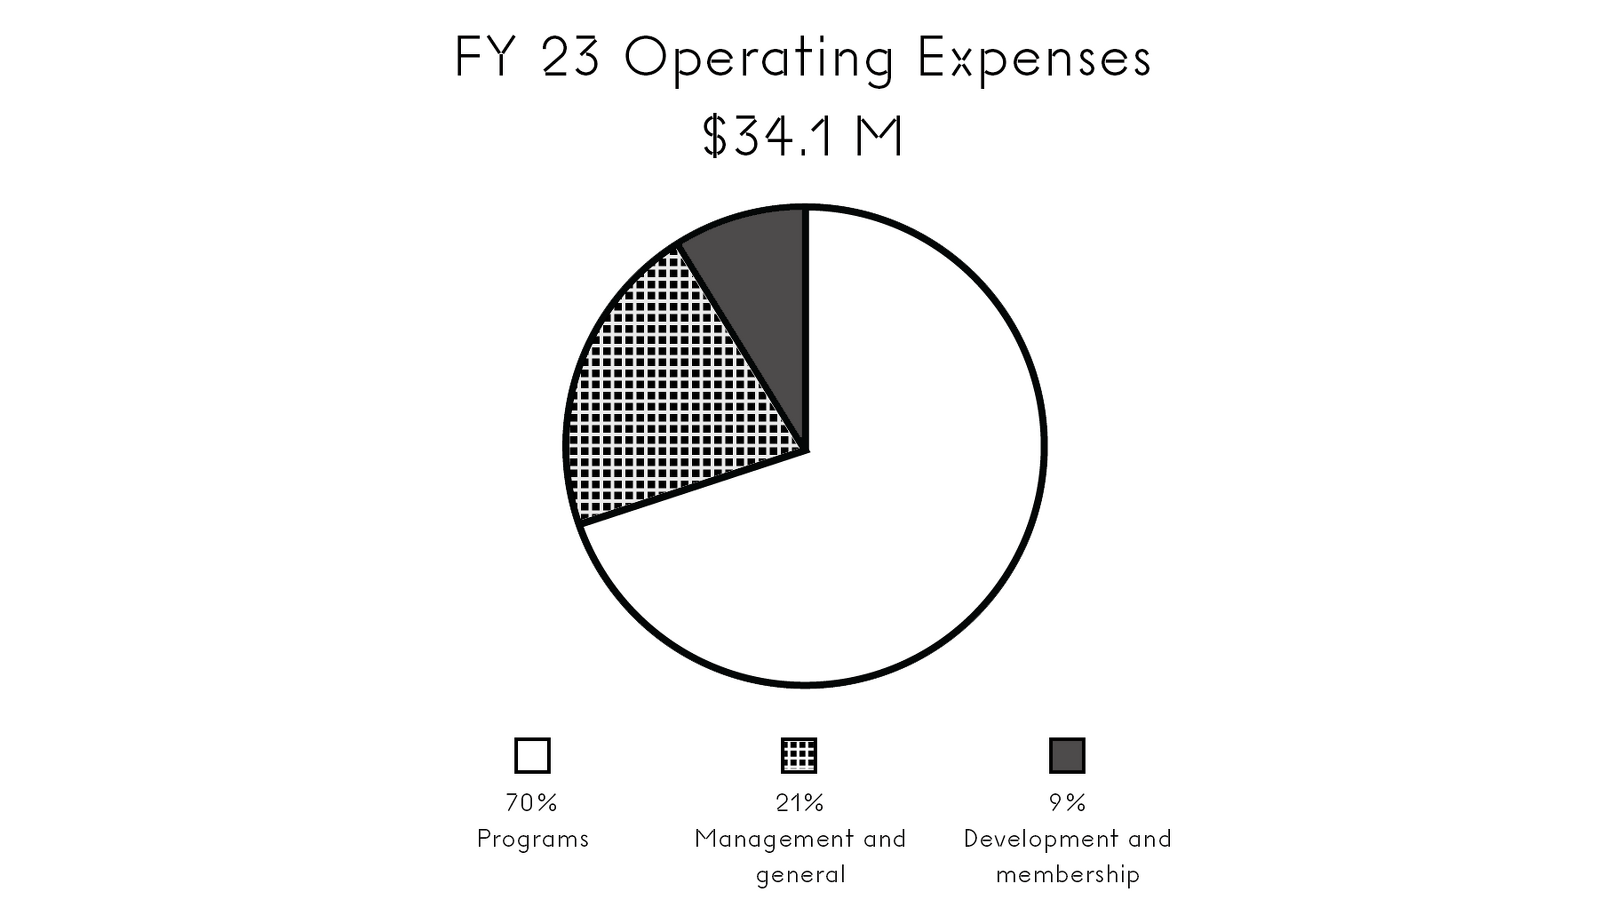 Pie chart of fiscal year 2023's operating expenses of $34.1 million. With 70% from programs; 21% from management and general; and 9% from development and membership.